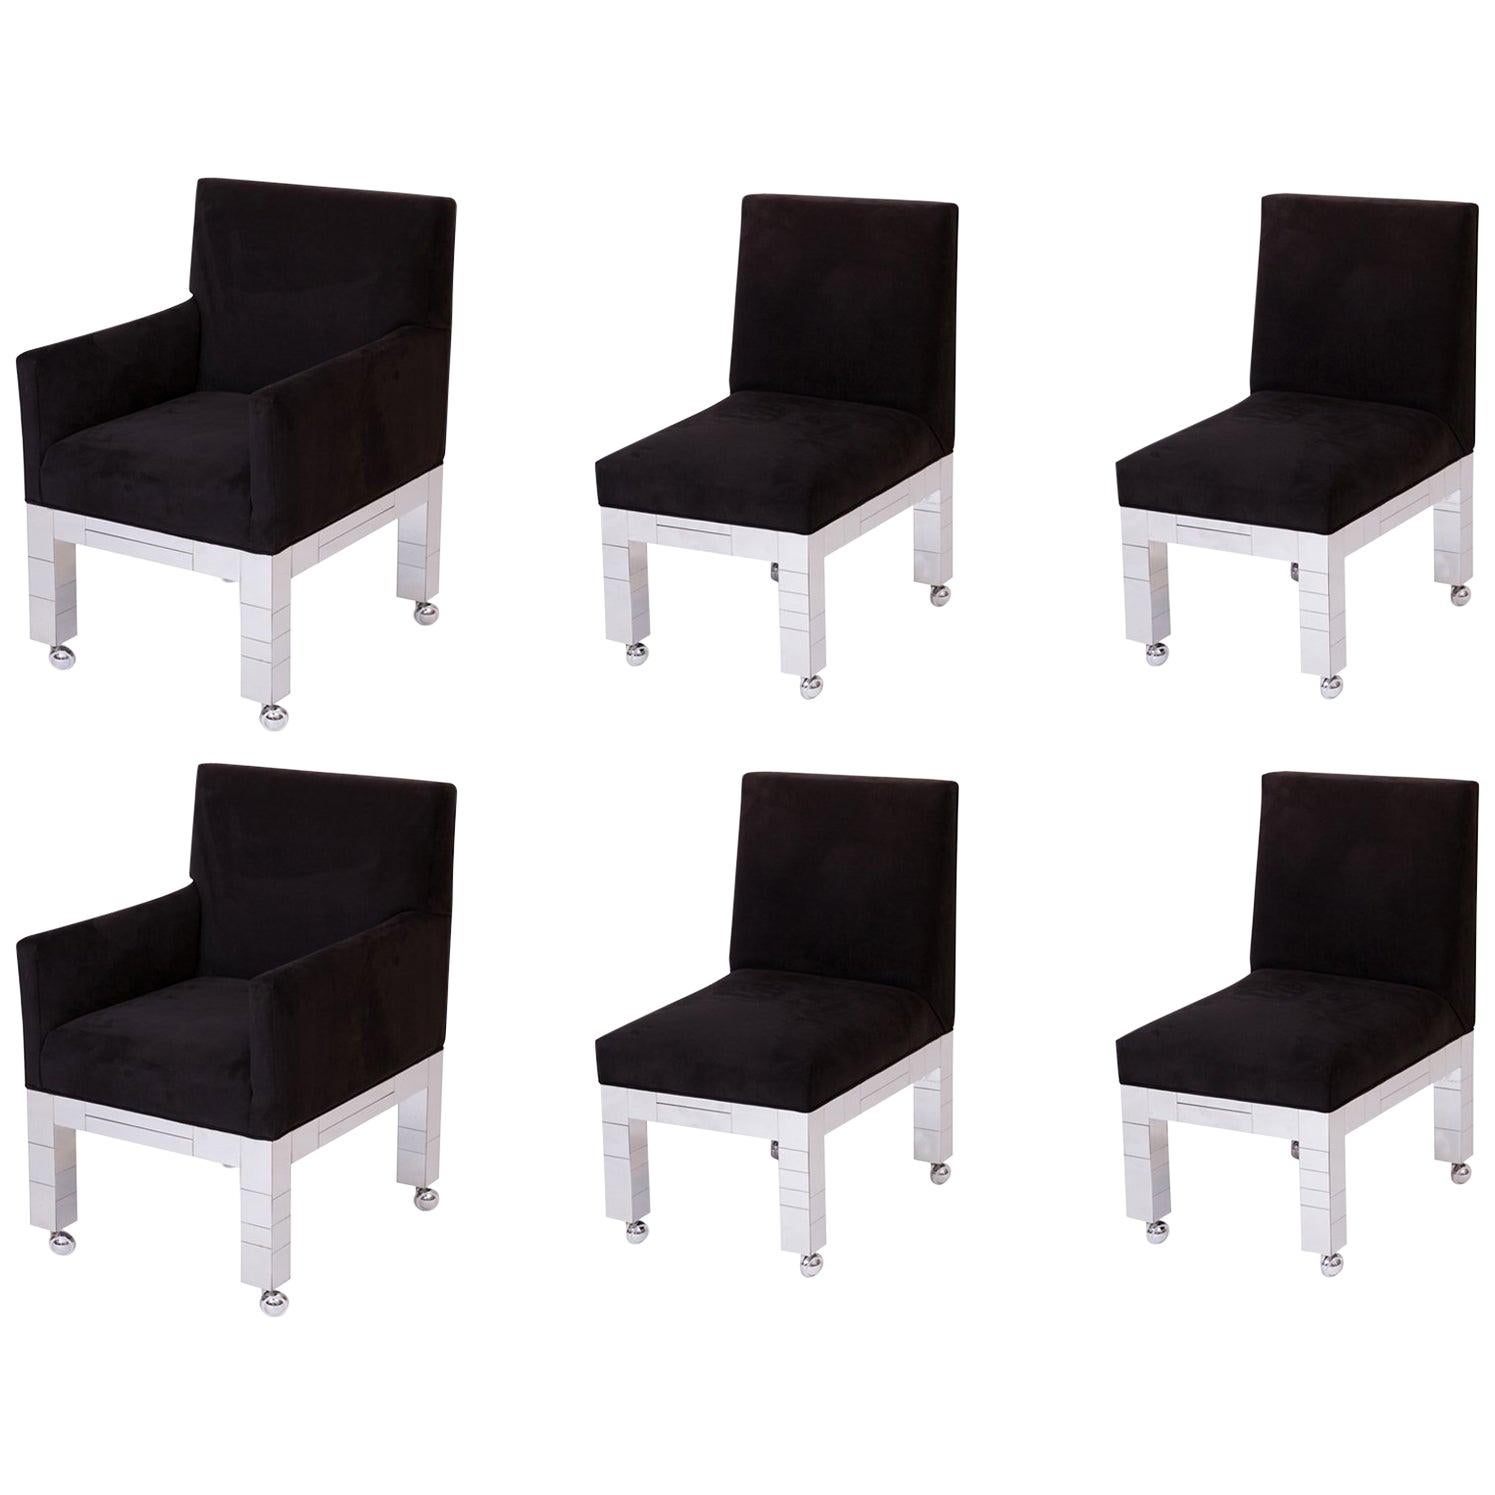 Paul Evans Black Ultrasuede 'Cityscape' Dining Chairs with Chrome Bases '6'